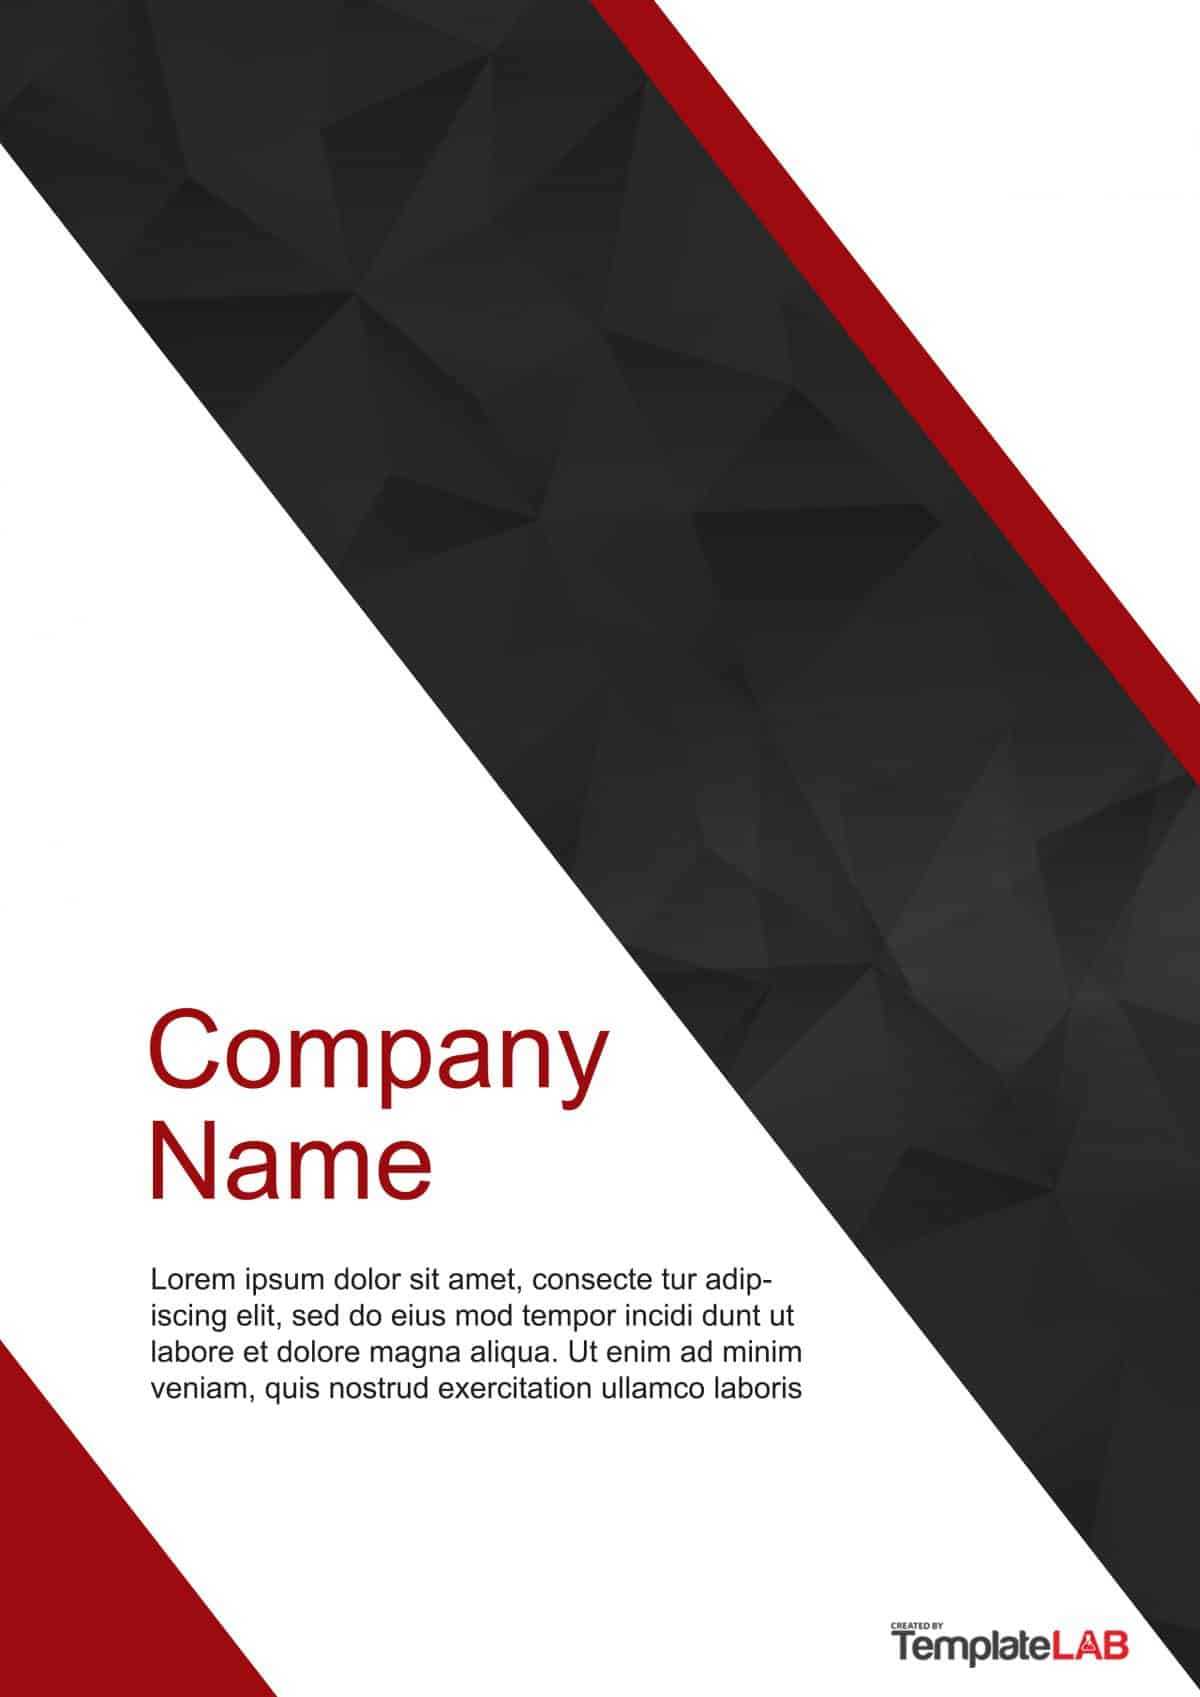 39 Amazing Cover Page Templates (Word + Psd) ᐅ Template Lab For Word Title Page Templates